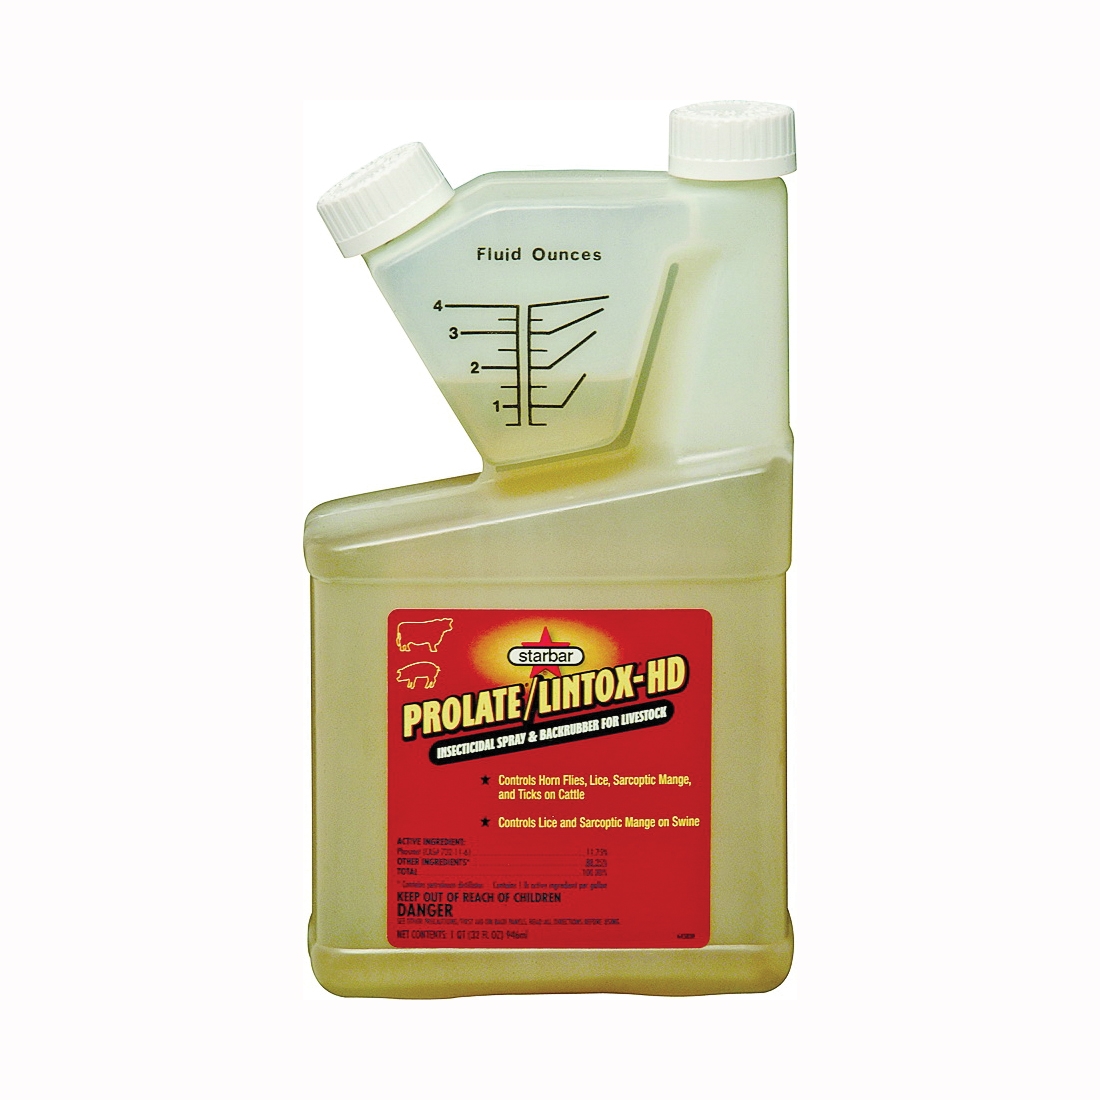 PROLATE/LINTOX-HD 64580 Insecticide Spray and Backrubber, Liquid, Light Amber/Medium Brown, 1 qt Bottle